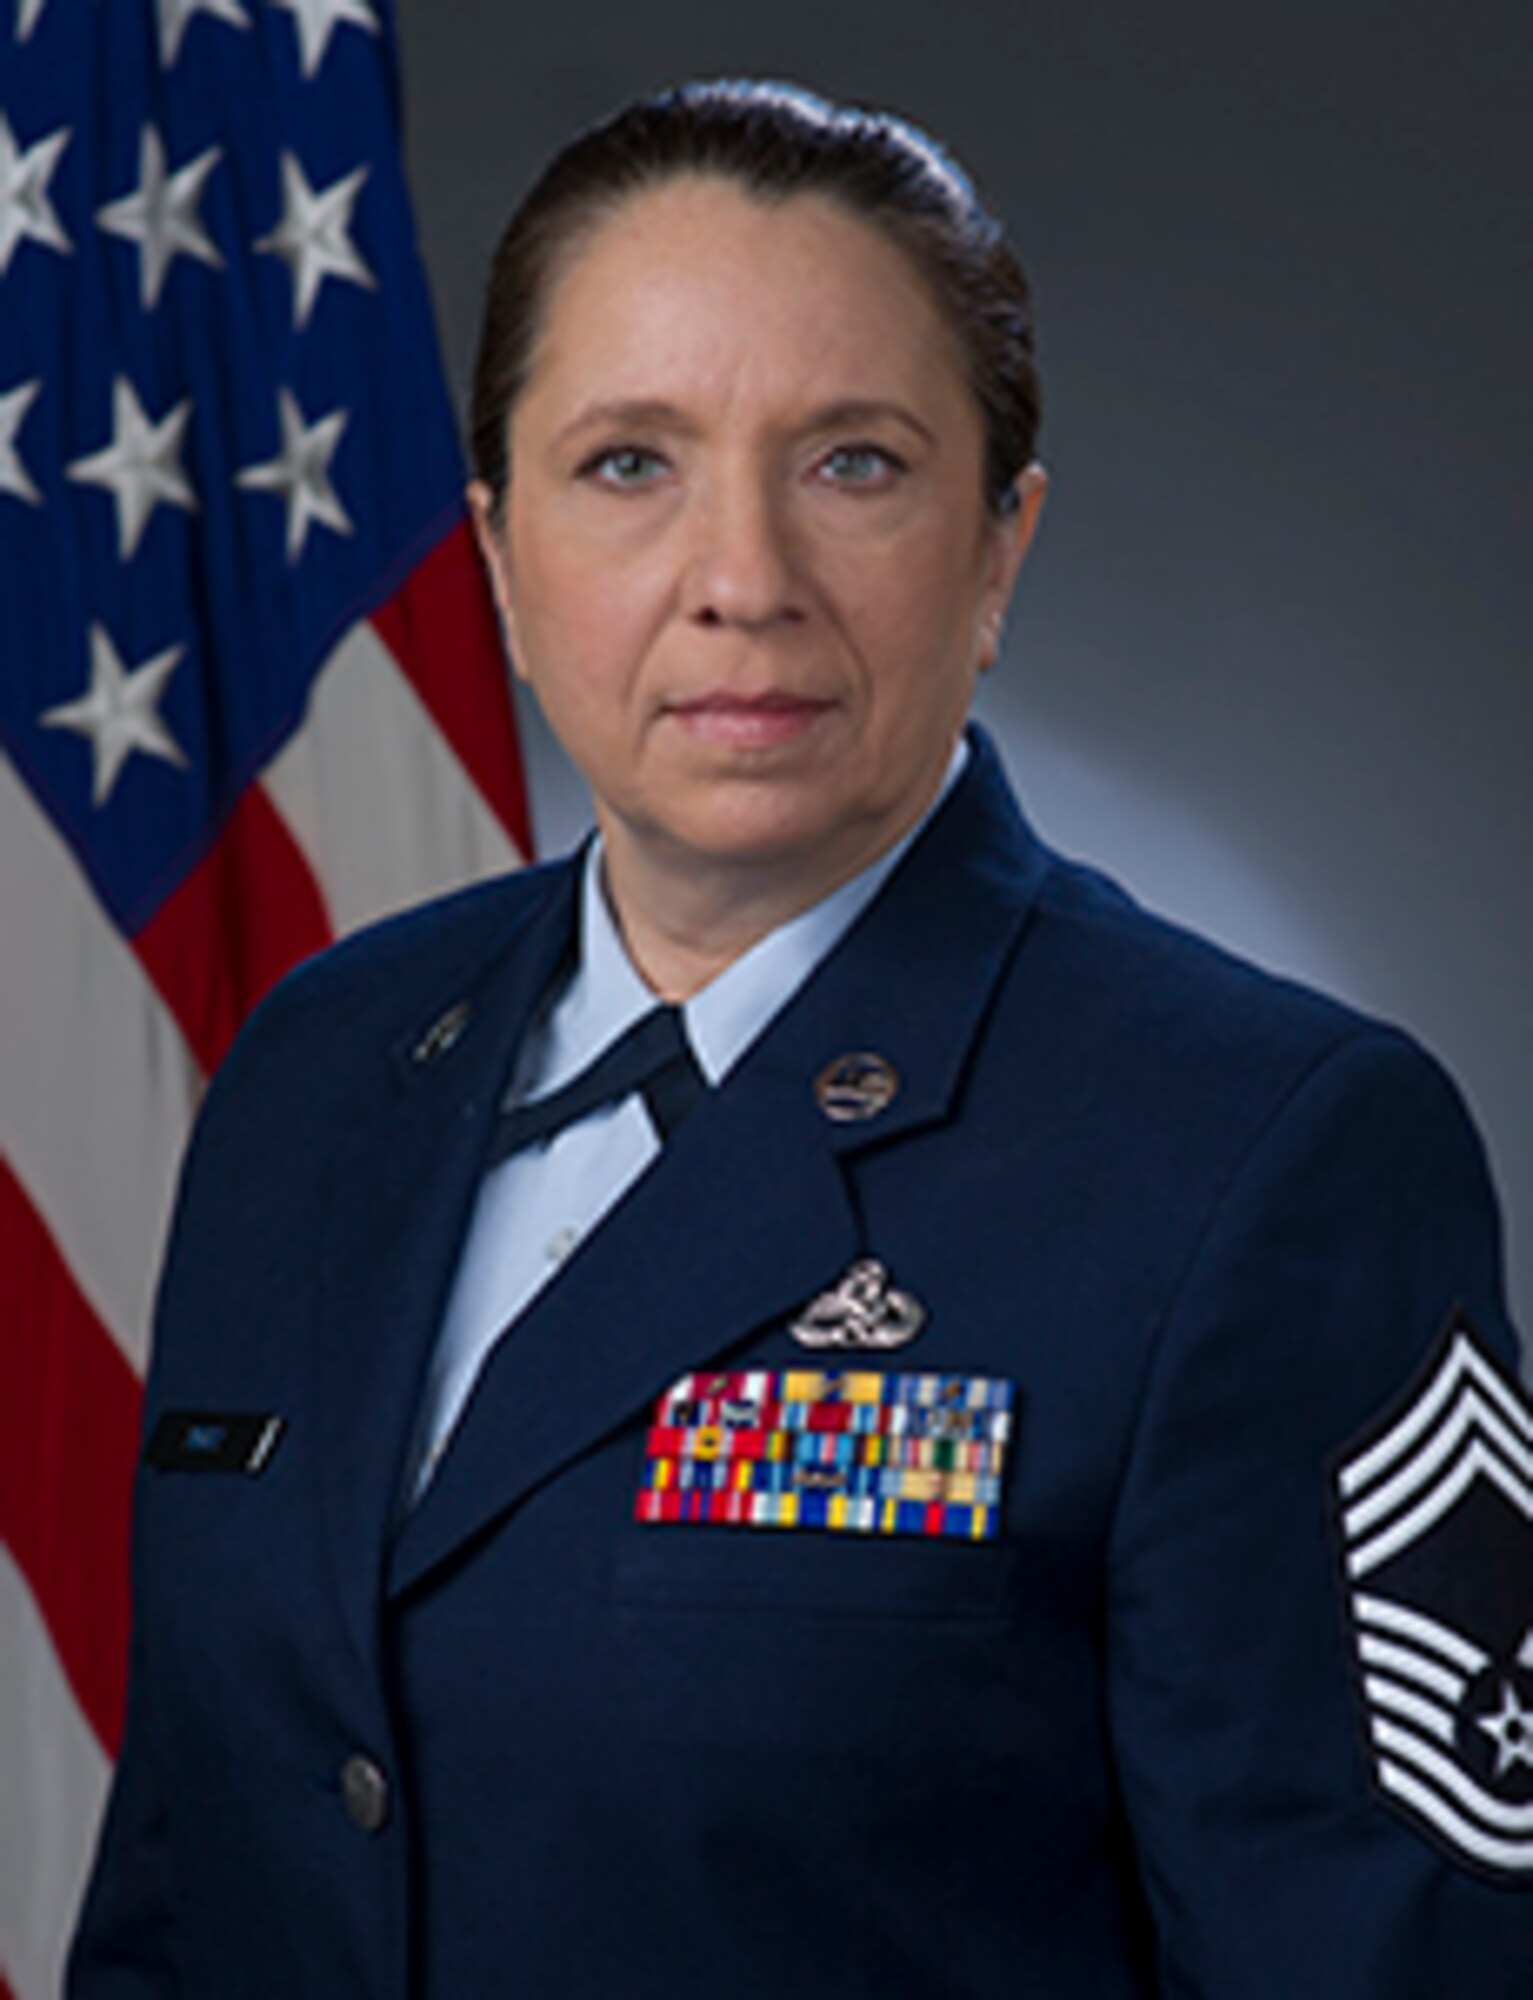 Chief Master Sgt. Kimberly L. Reay, official photo, U.S. Air Force